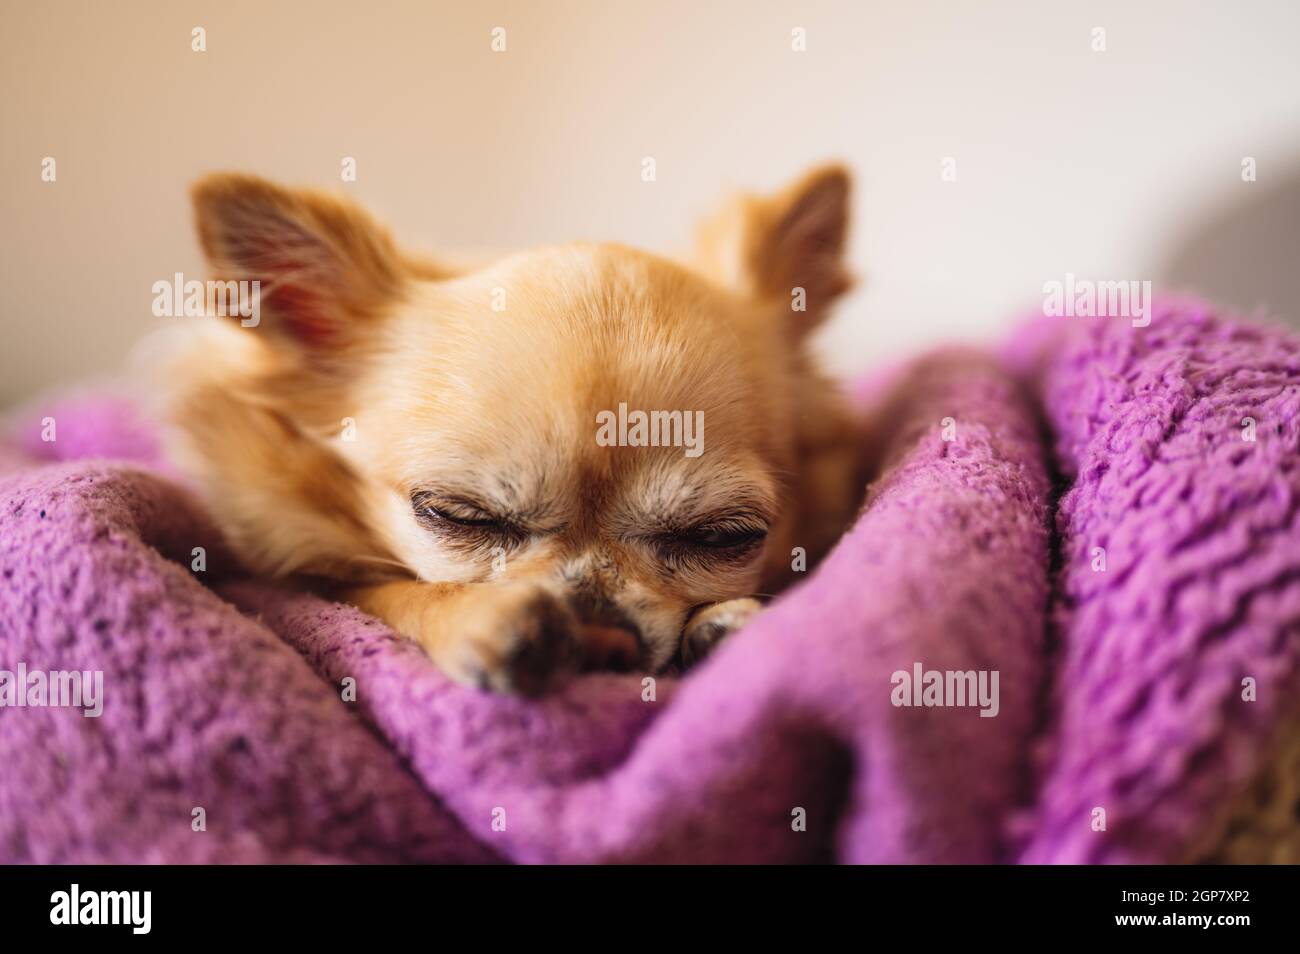 Little cute chihuahua sleeping on a purple blanket. Front view. Stock Photo